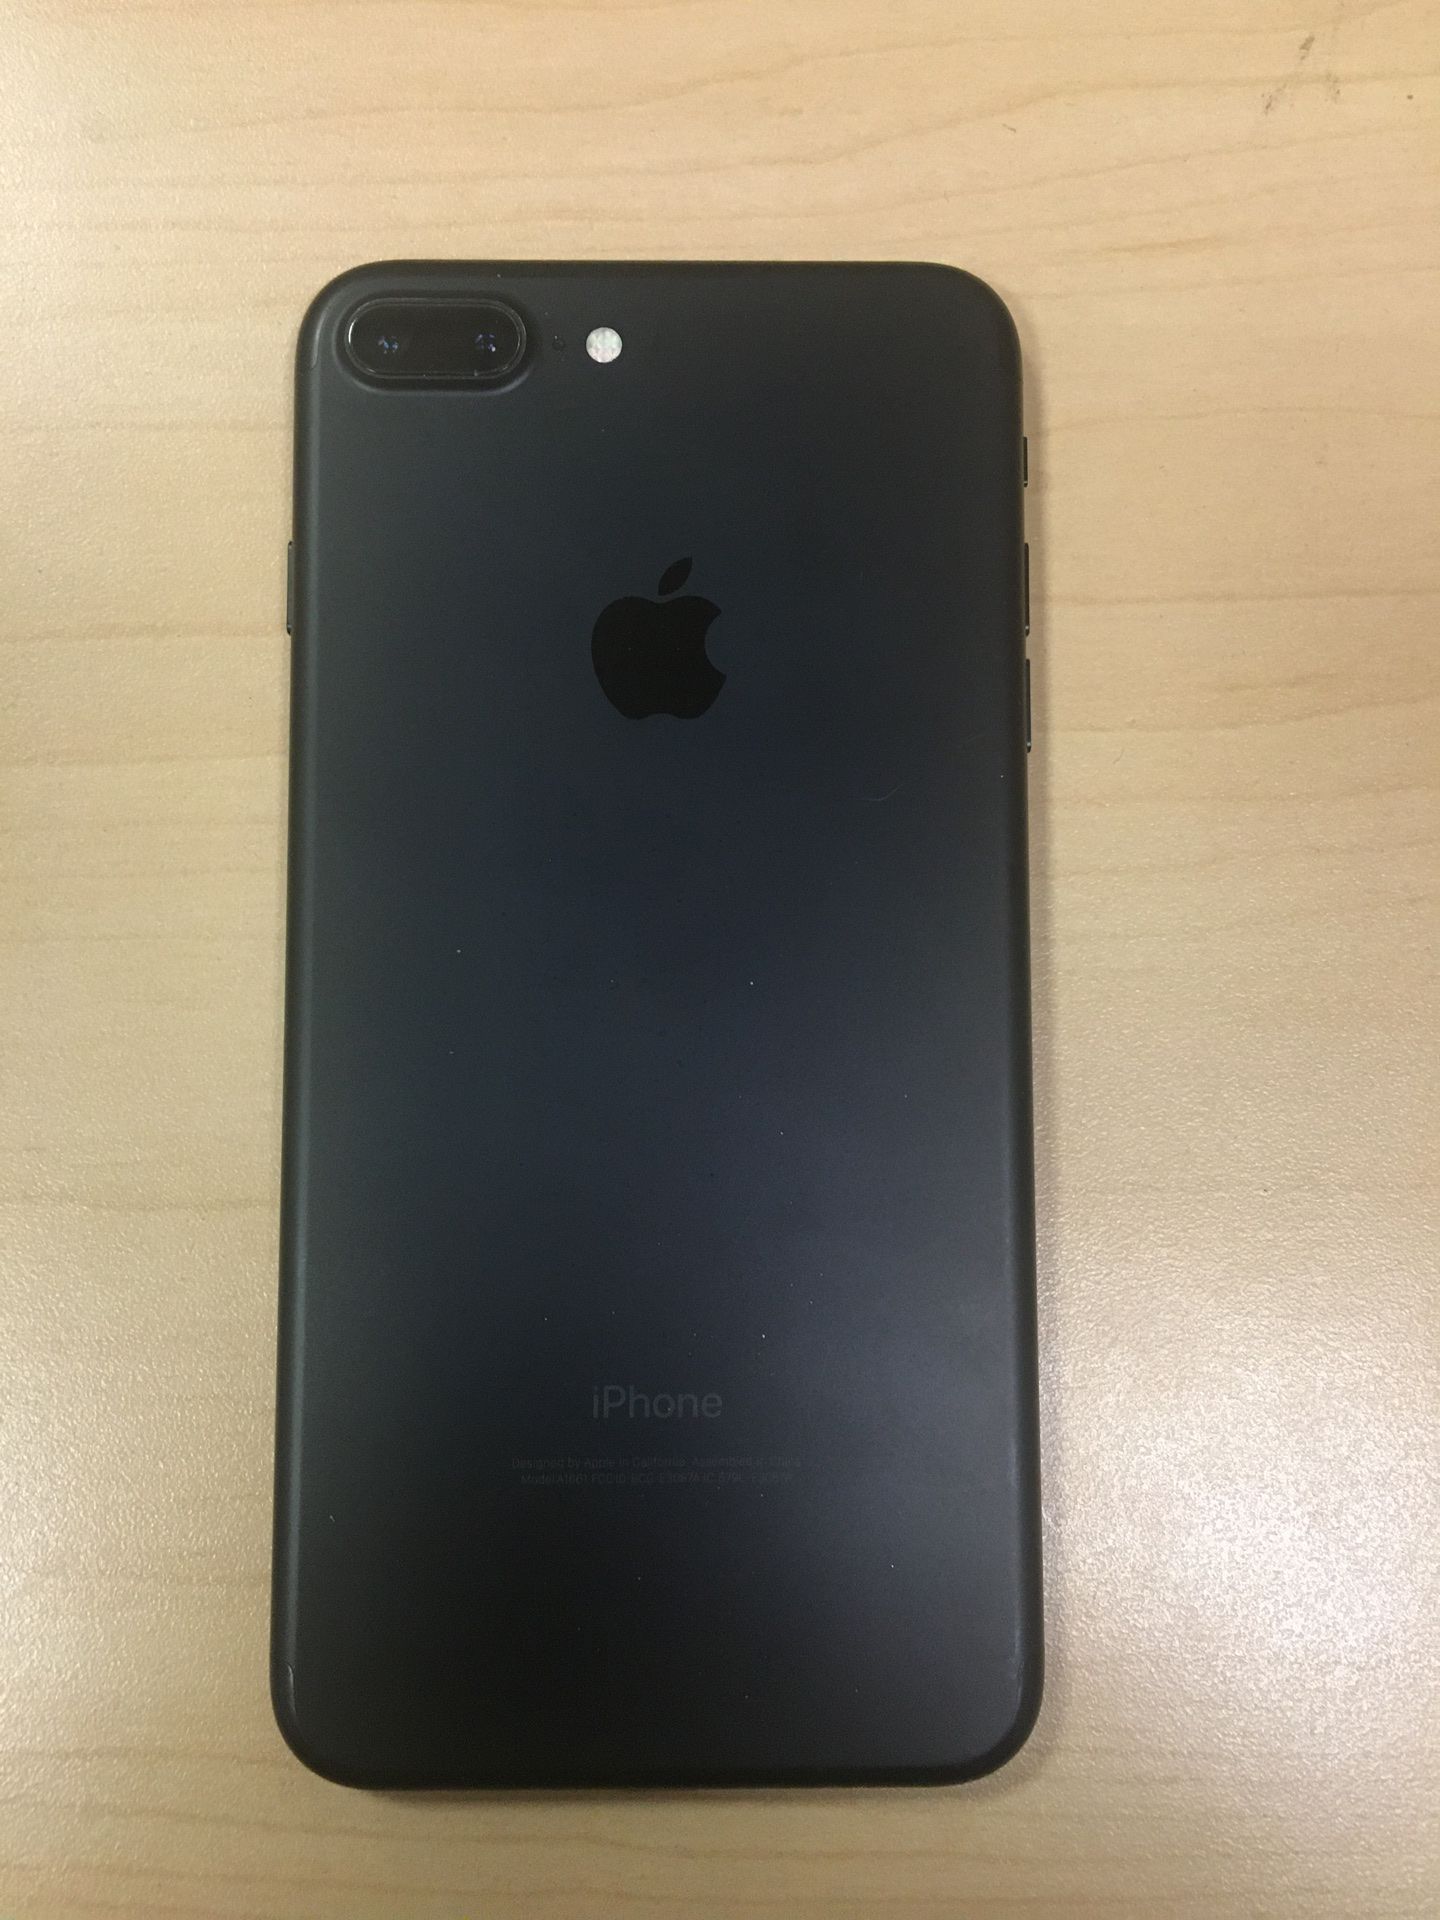 iPhone 7 Plus 128gb UNLOCKED with 6 months warranty